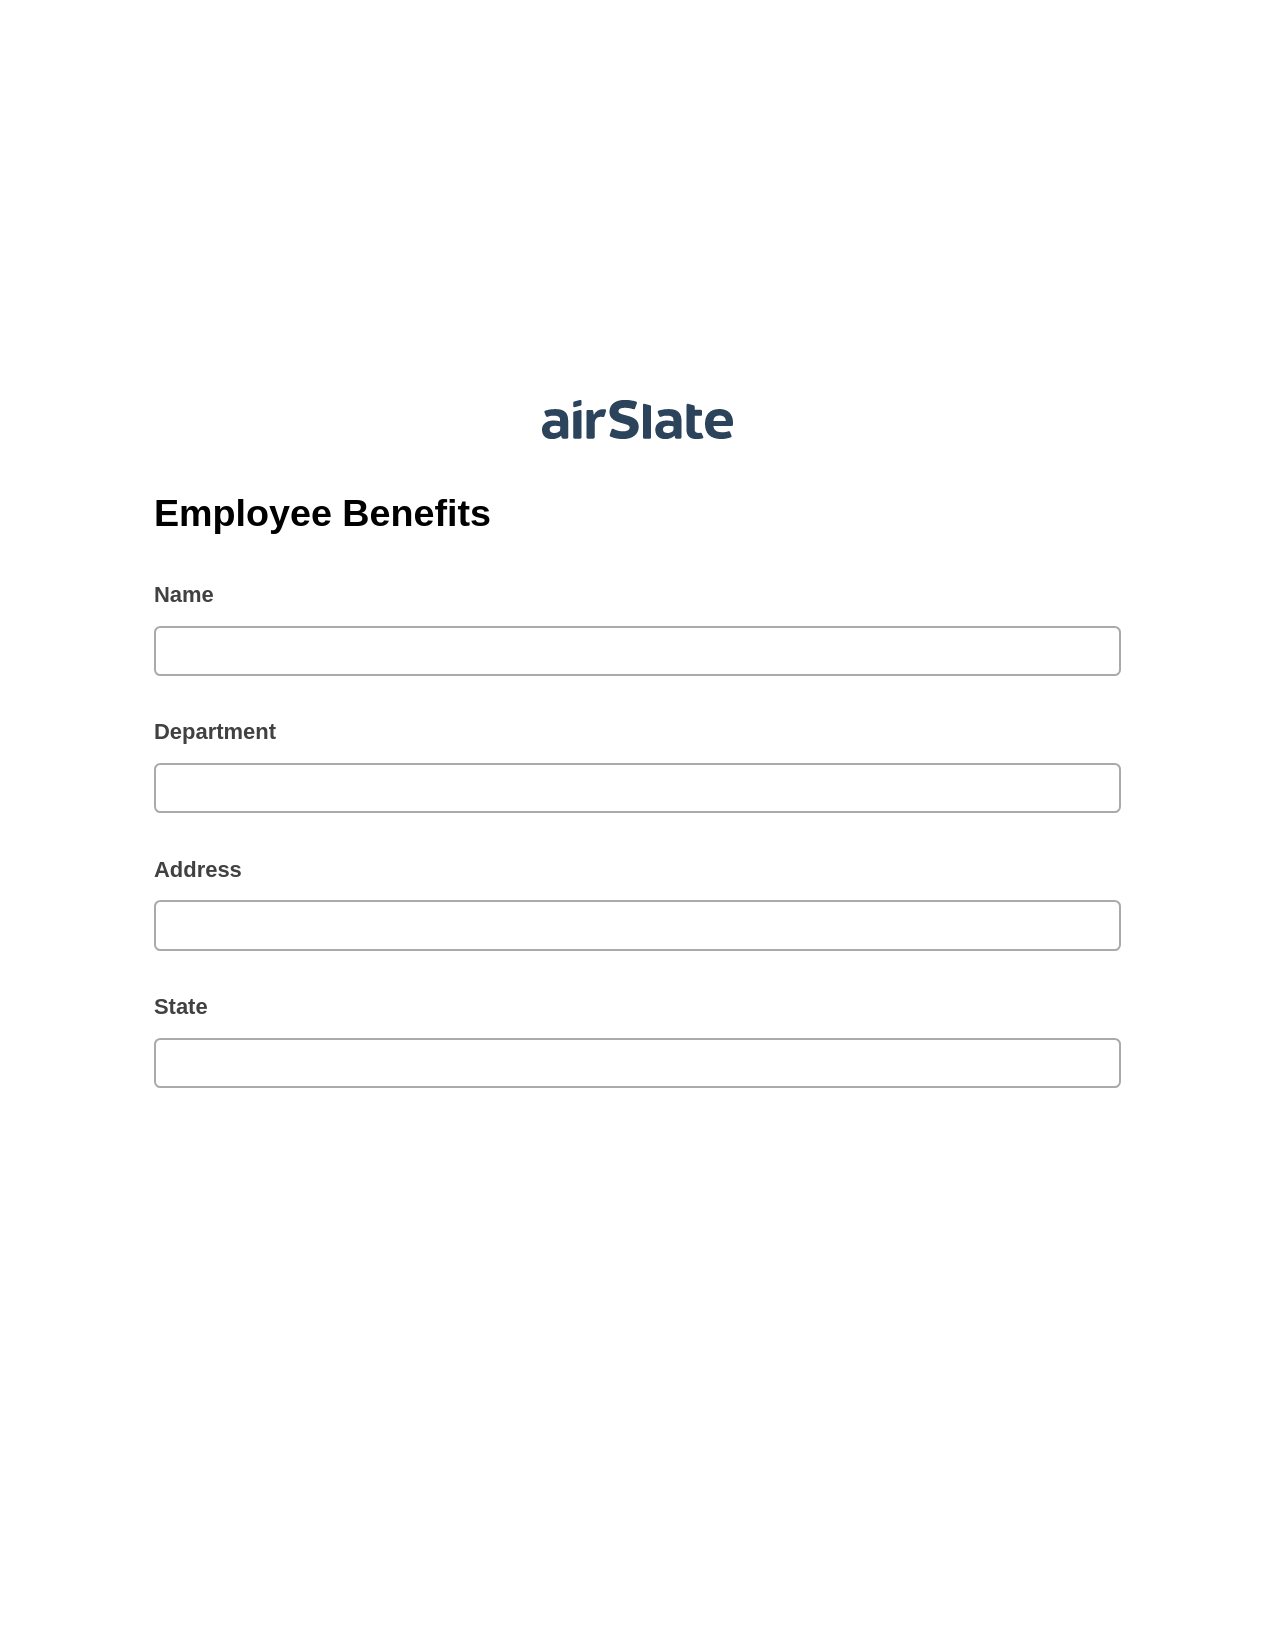 Multirole Employee Benefits Pre-fill from CSV File Bot, Add Tags to Slate Bot, Export to Excel 365 Bot